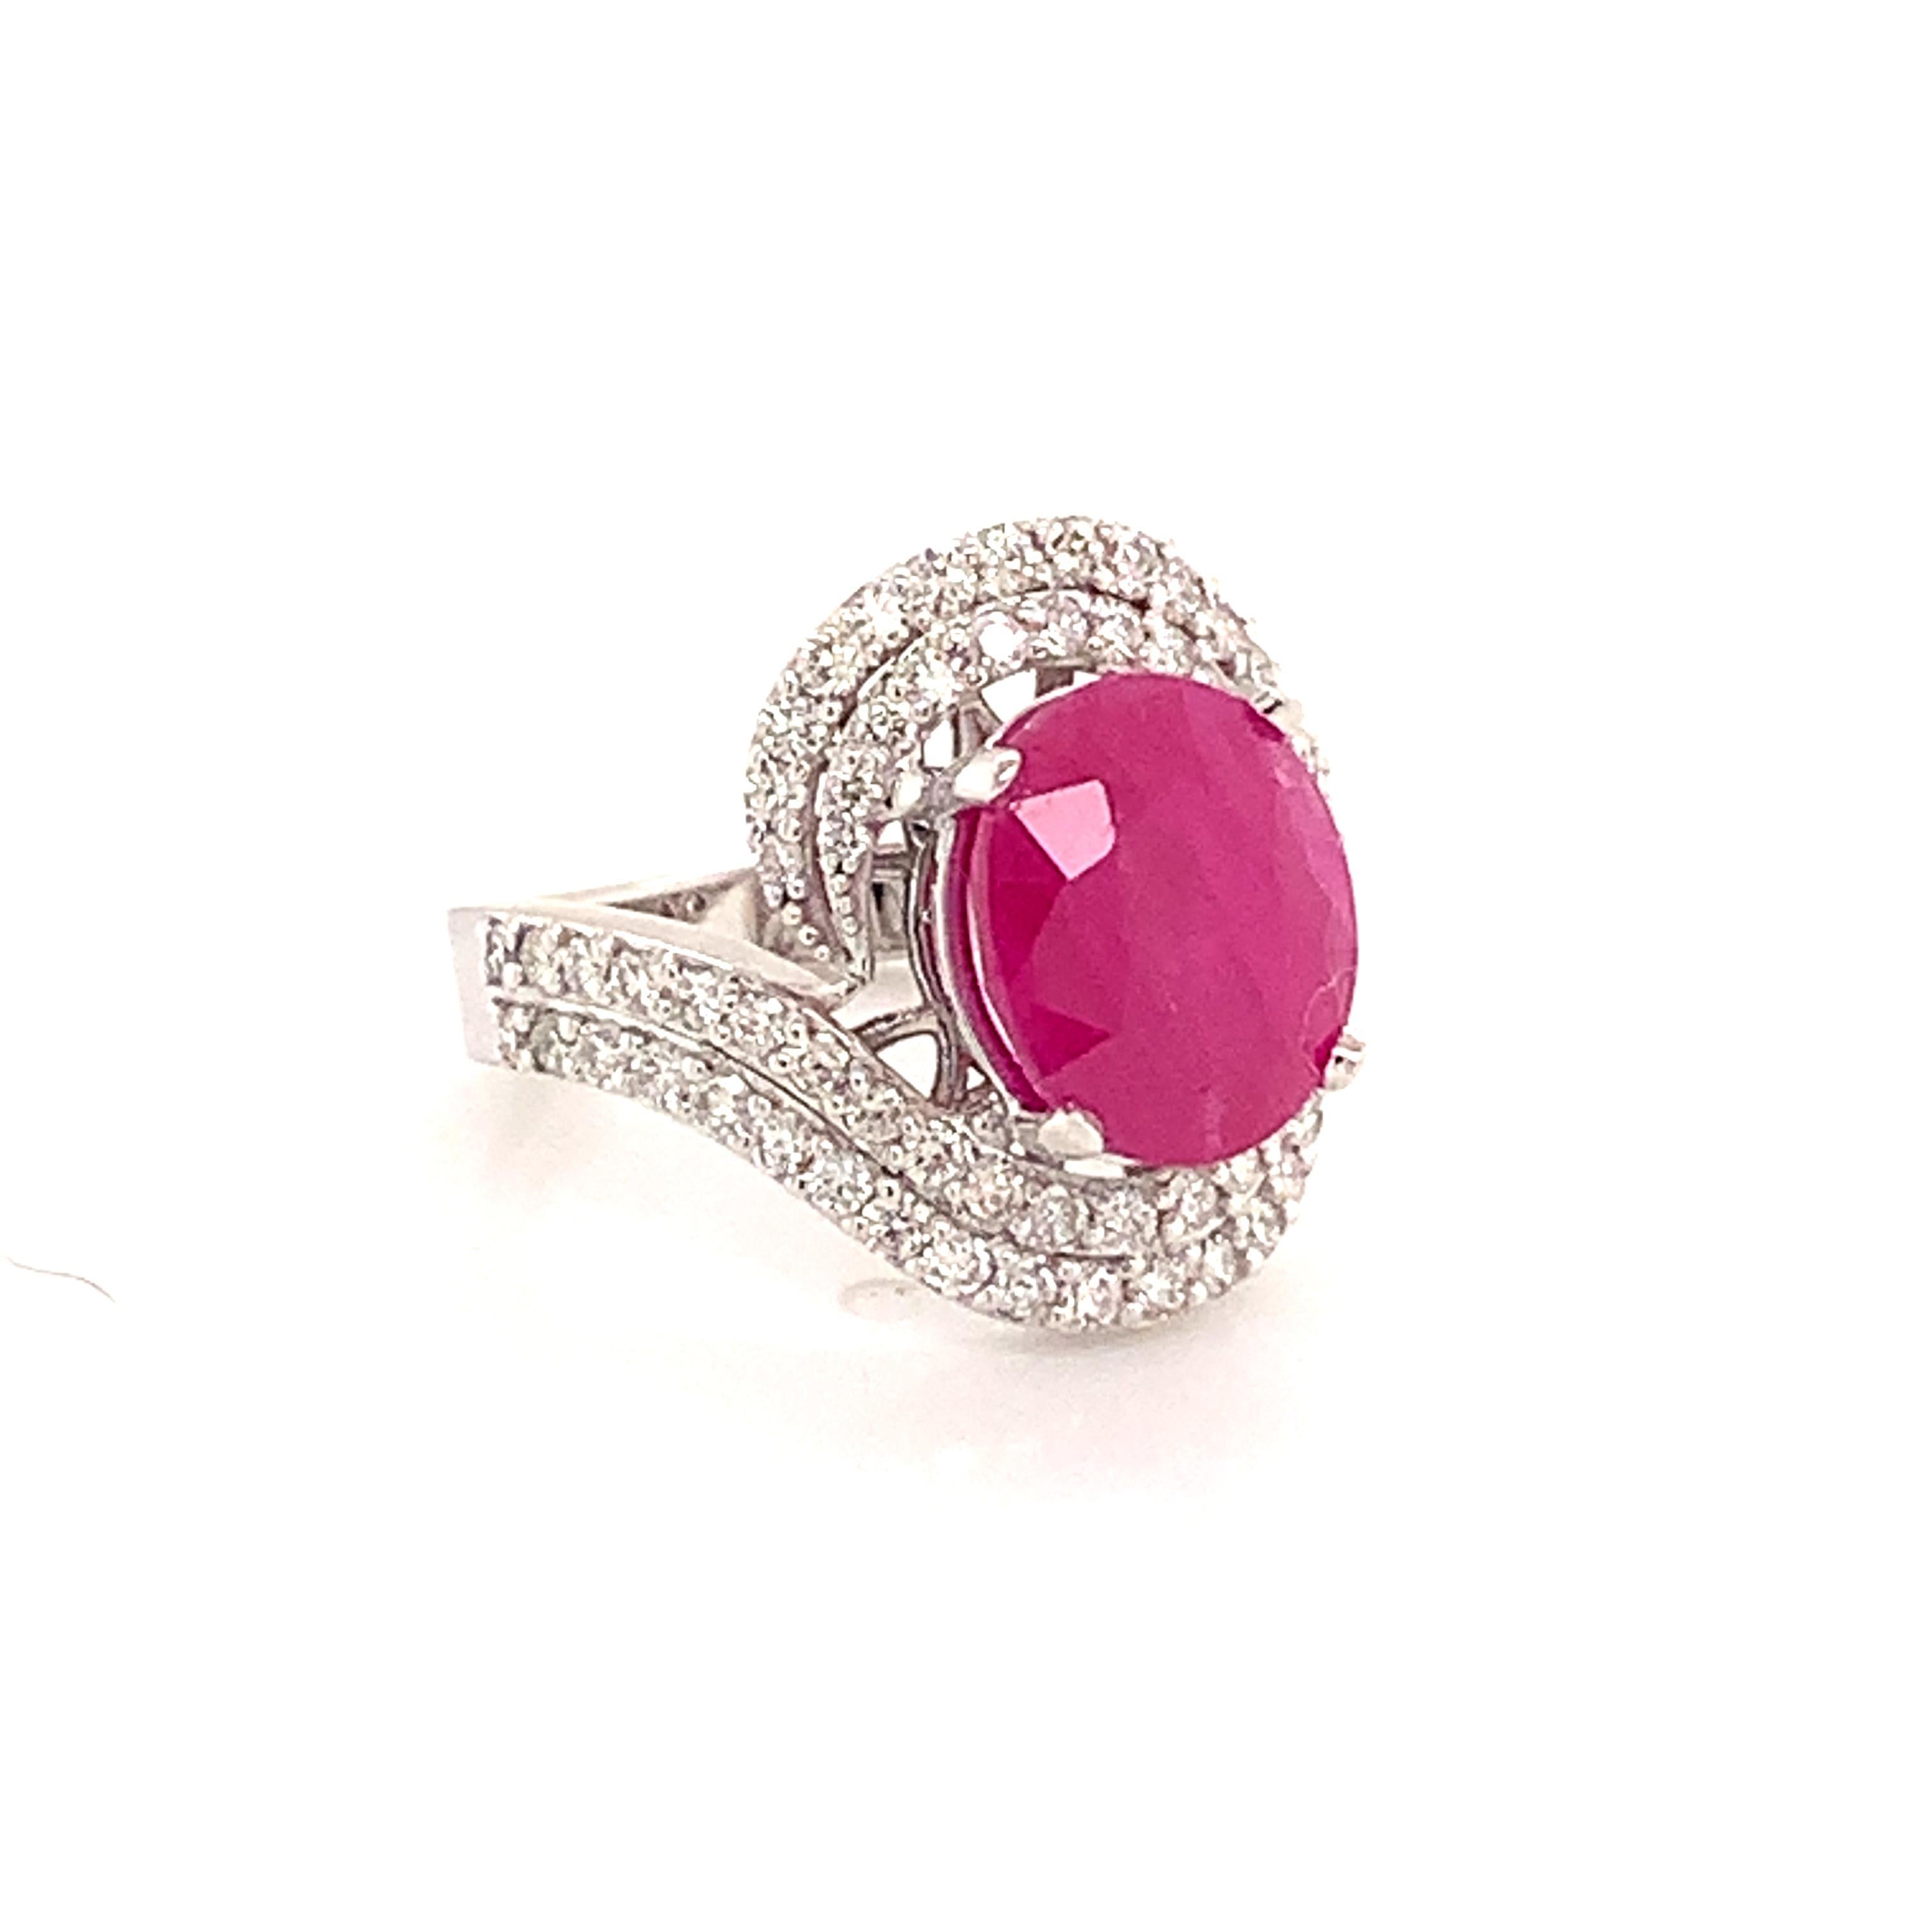 Women's Natural Ruby Diamond Ring 14k Gold 6.32 TCW GIA Certified For Sale